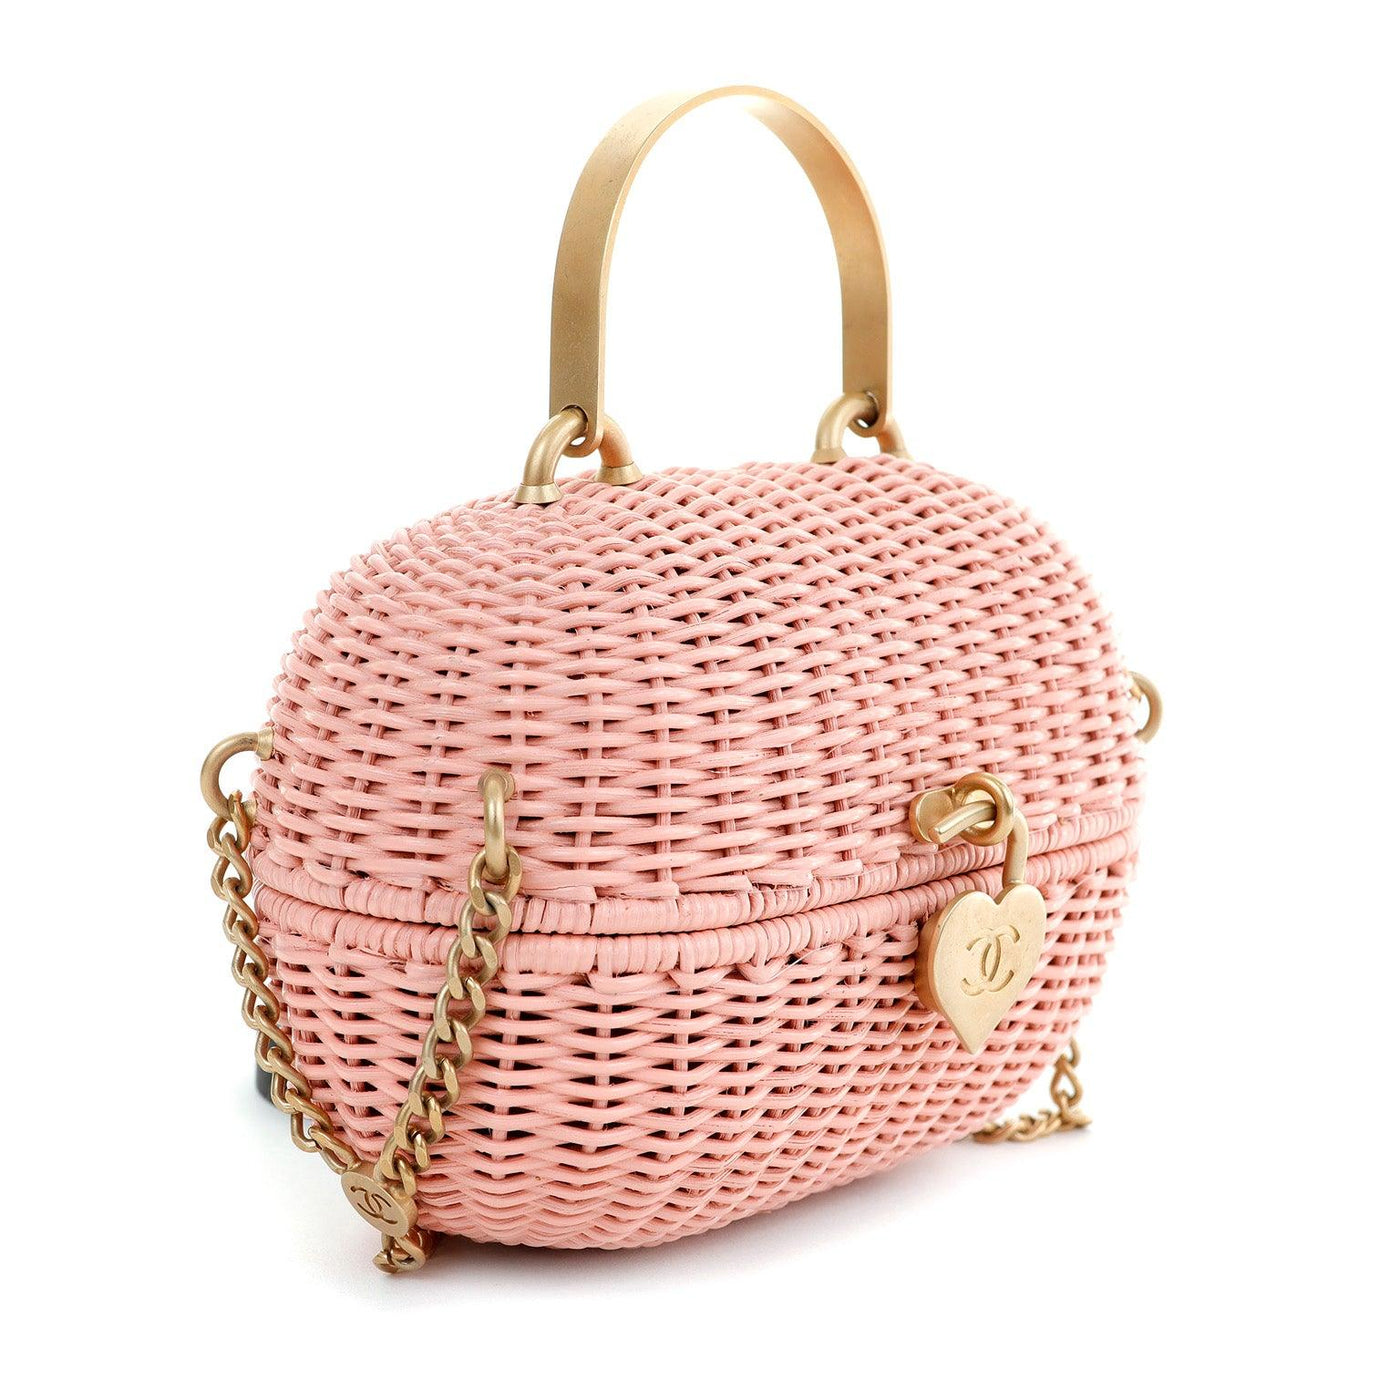 Chanel Pink Wicker Love Basket Runway Bag - Only Authentics